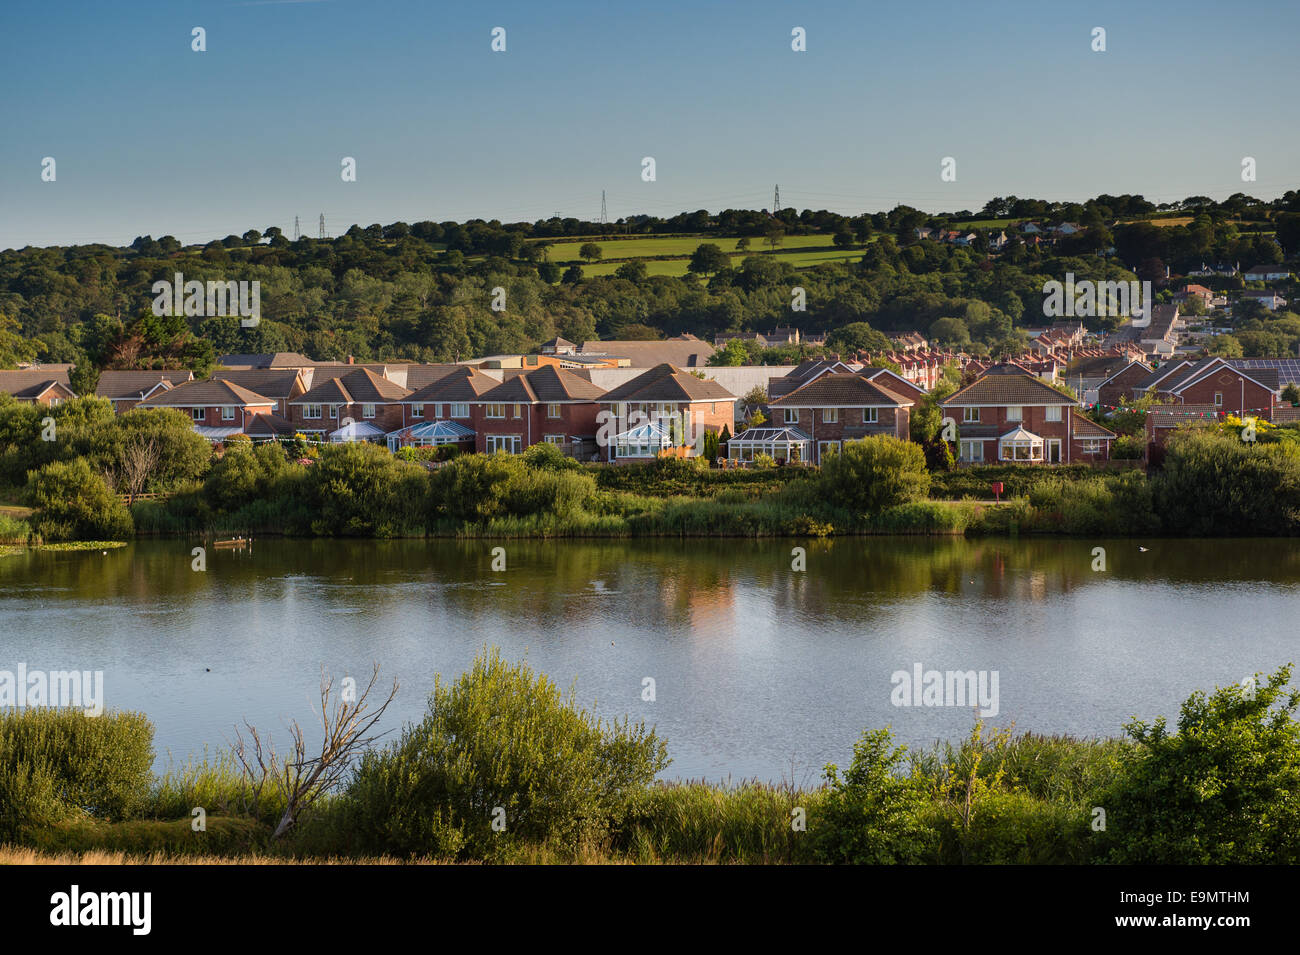 Waterside lakeside detached new modern houses by the  Millennium Park, Llanelli, Carmarthenshire Wales UK Stock Photo